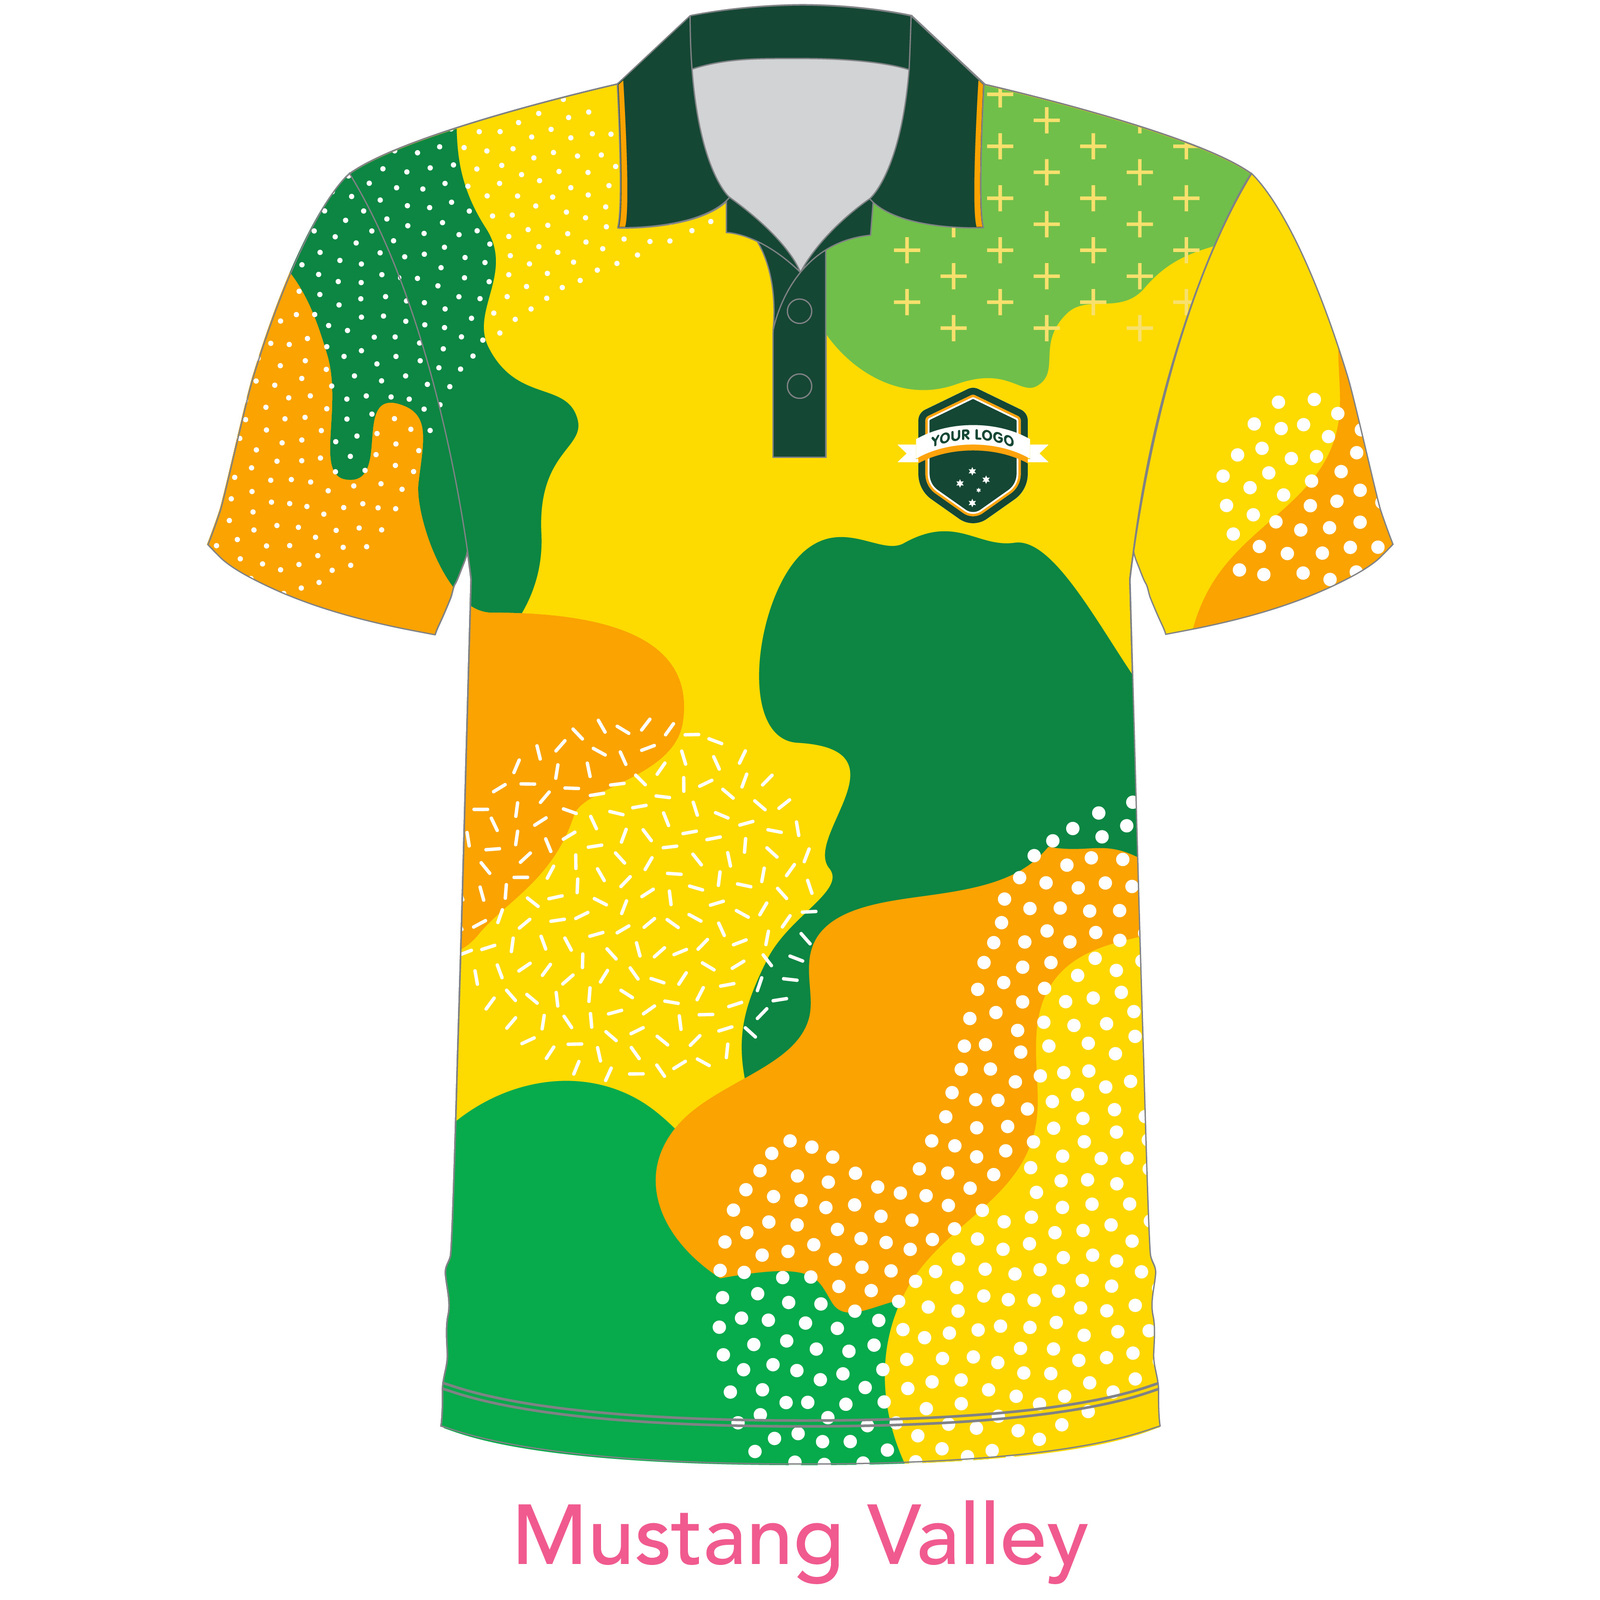 Customised Shirt - Mustang Valley